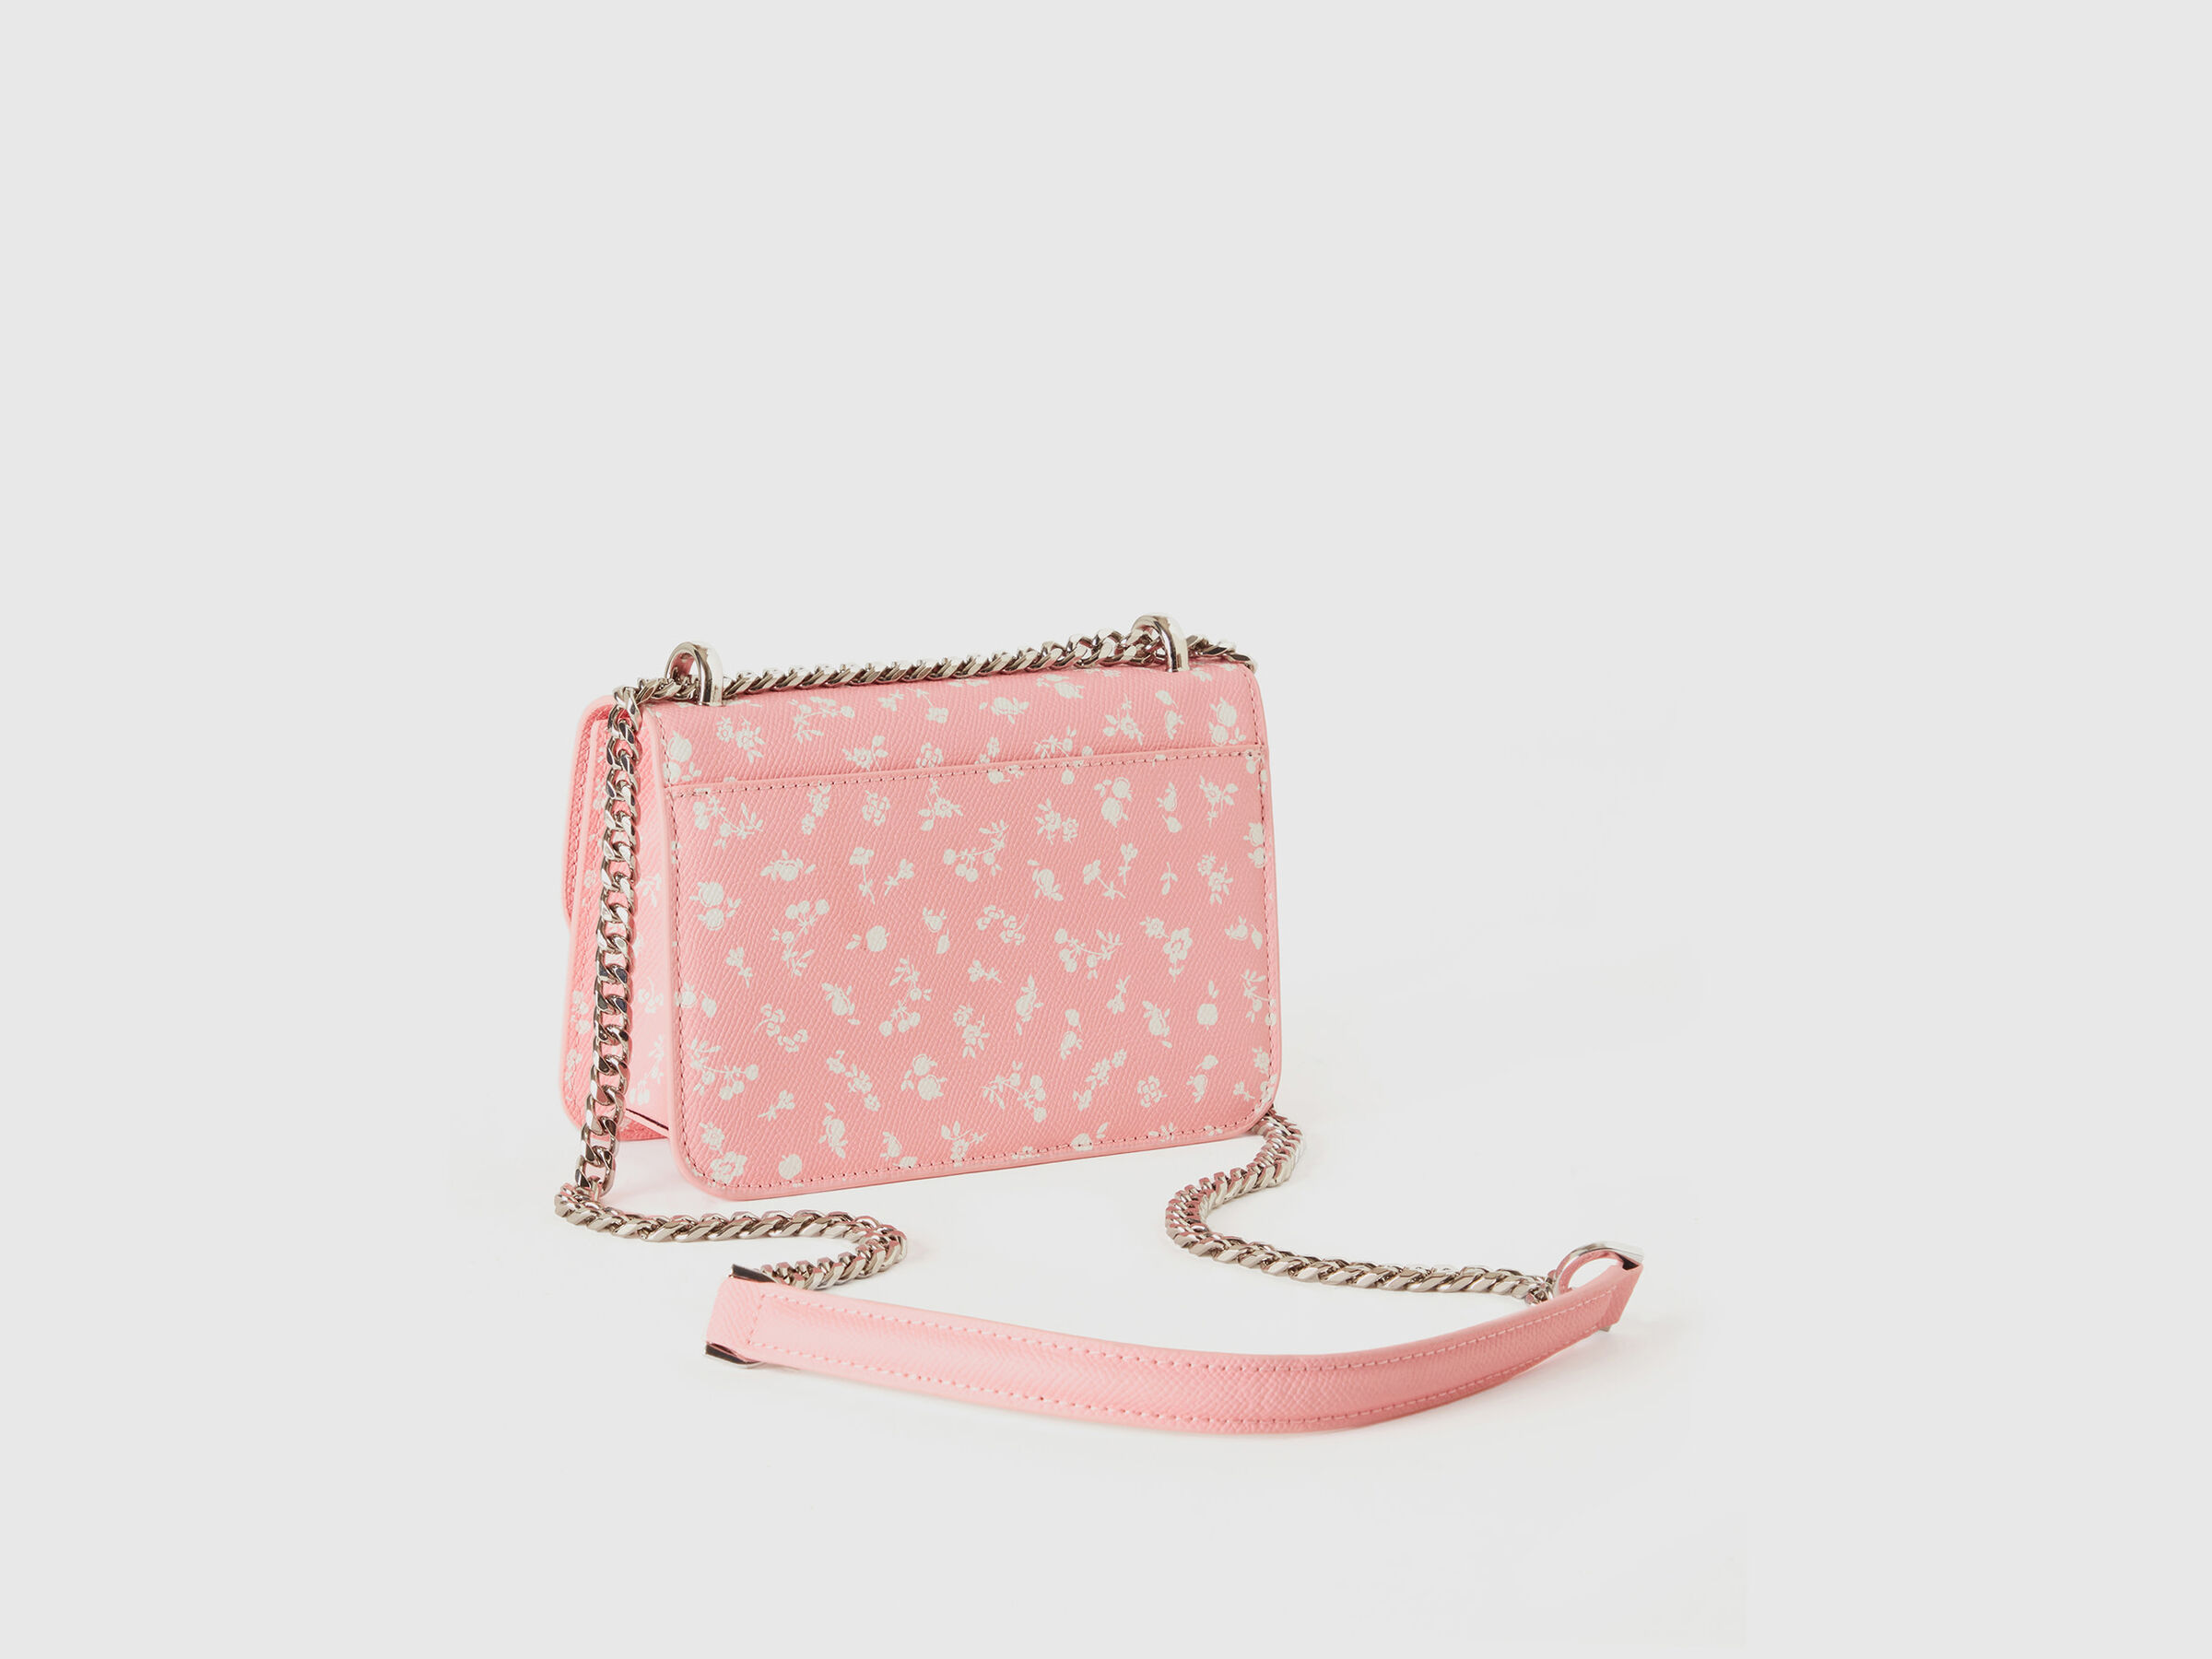 kål ressource lysere Small pink patterned Be Bag - Pink | Benetton